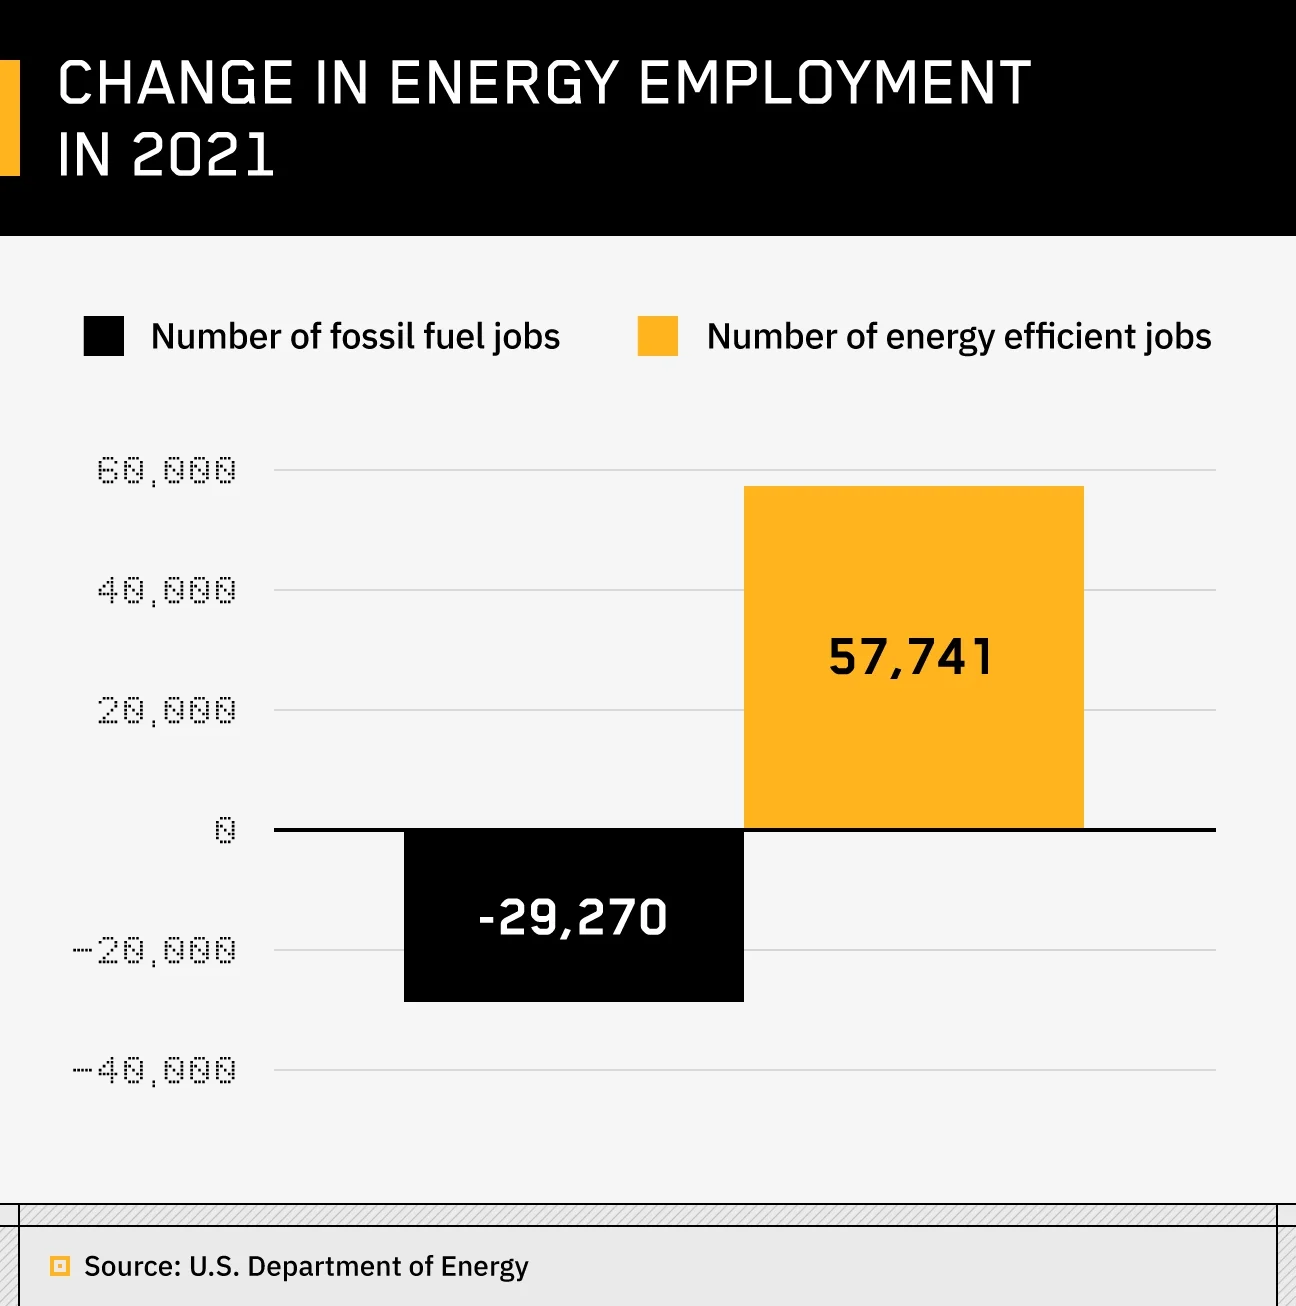 vertical bar chart illustrating the change in fossil fuel and energy efficient jobs in 2021 based on data from the U.S. Department of Energy